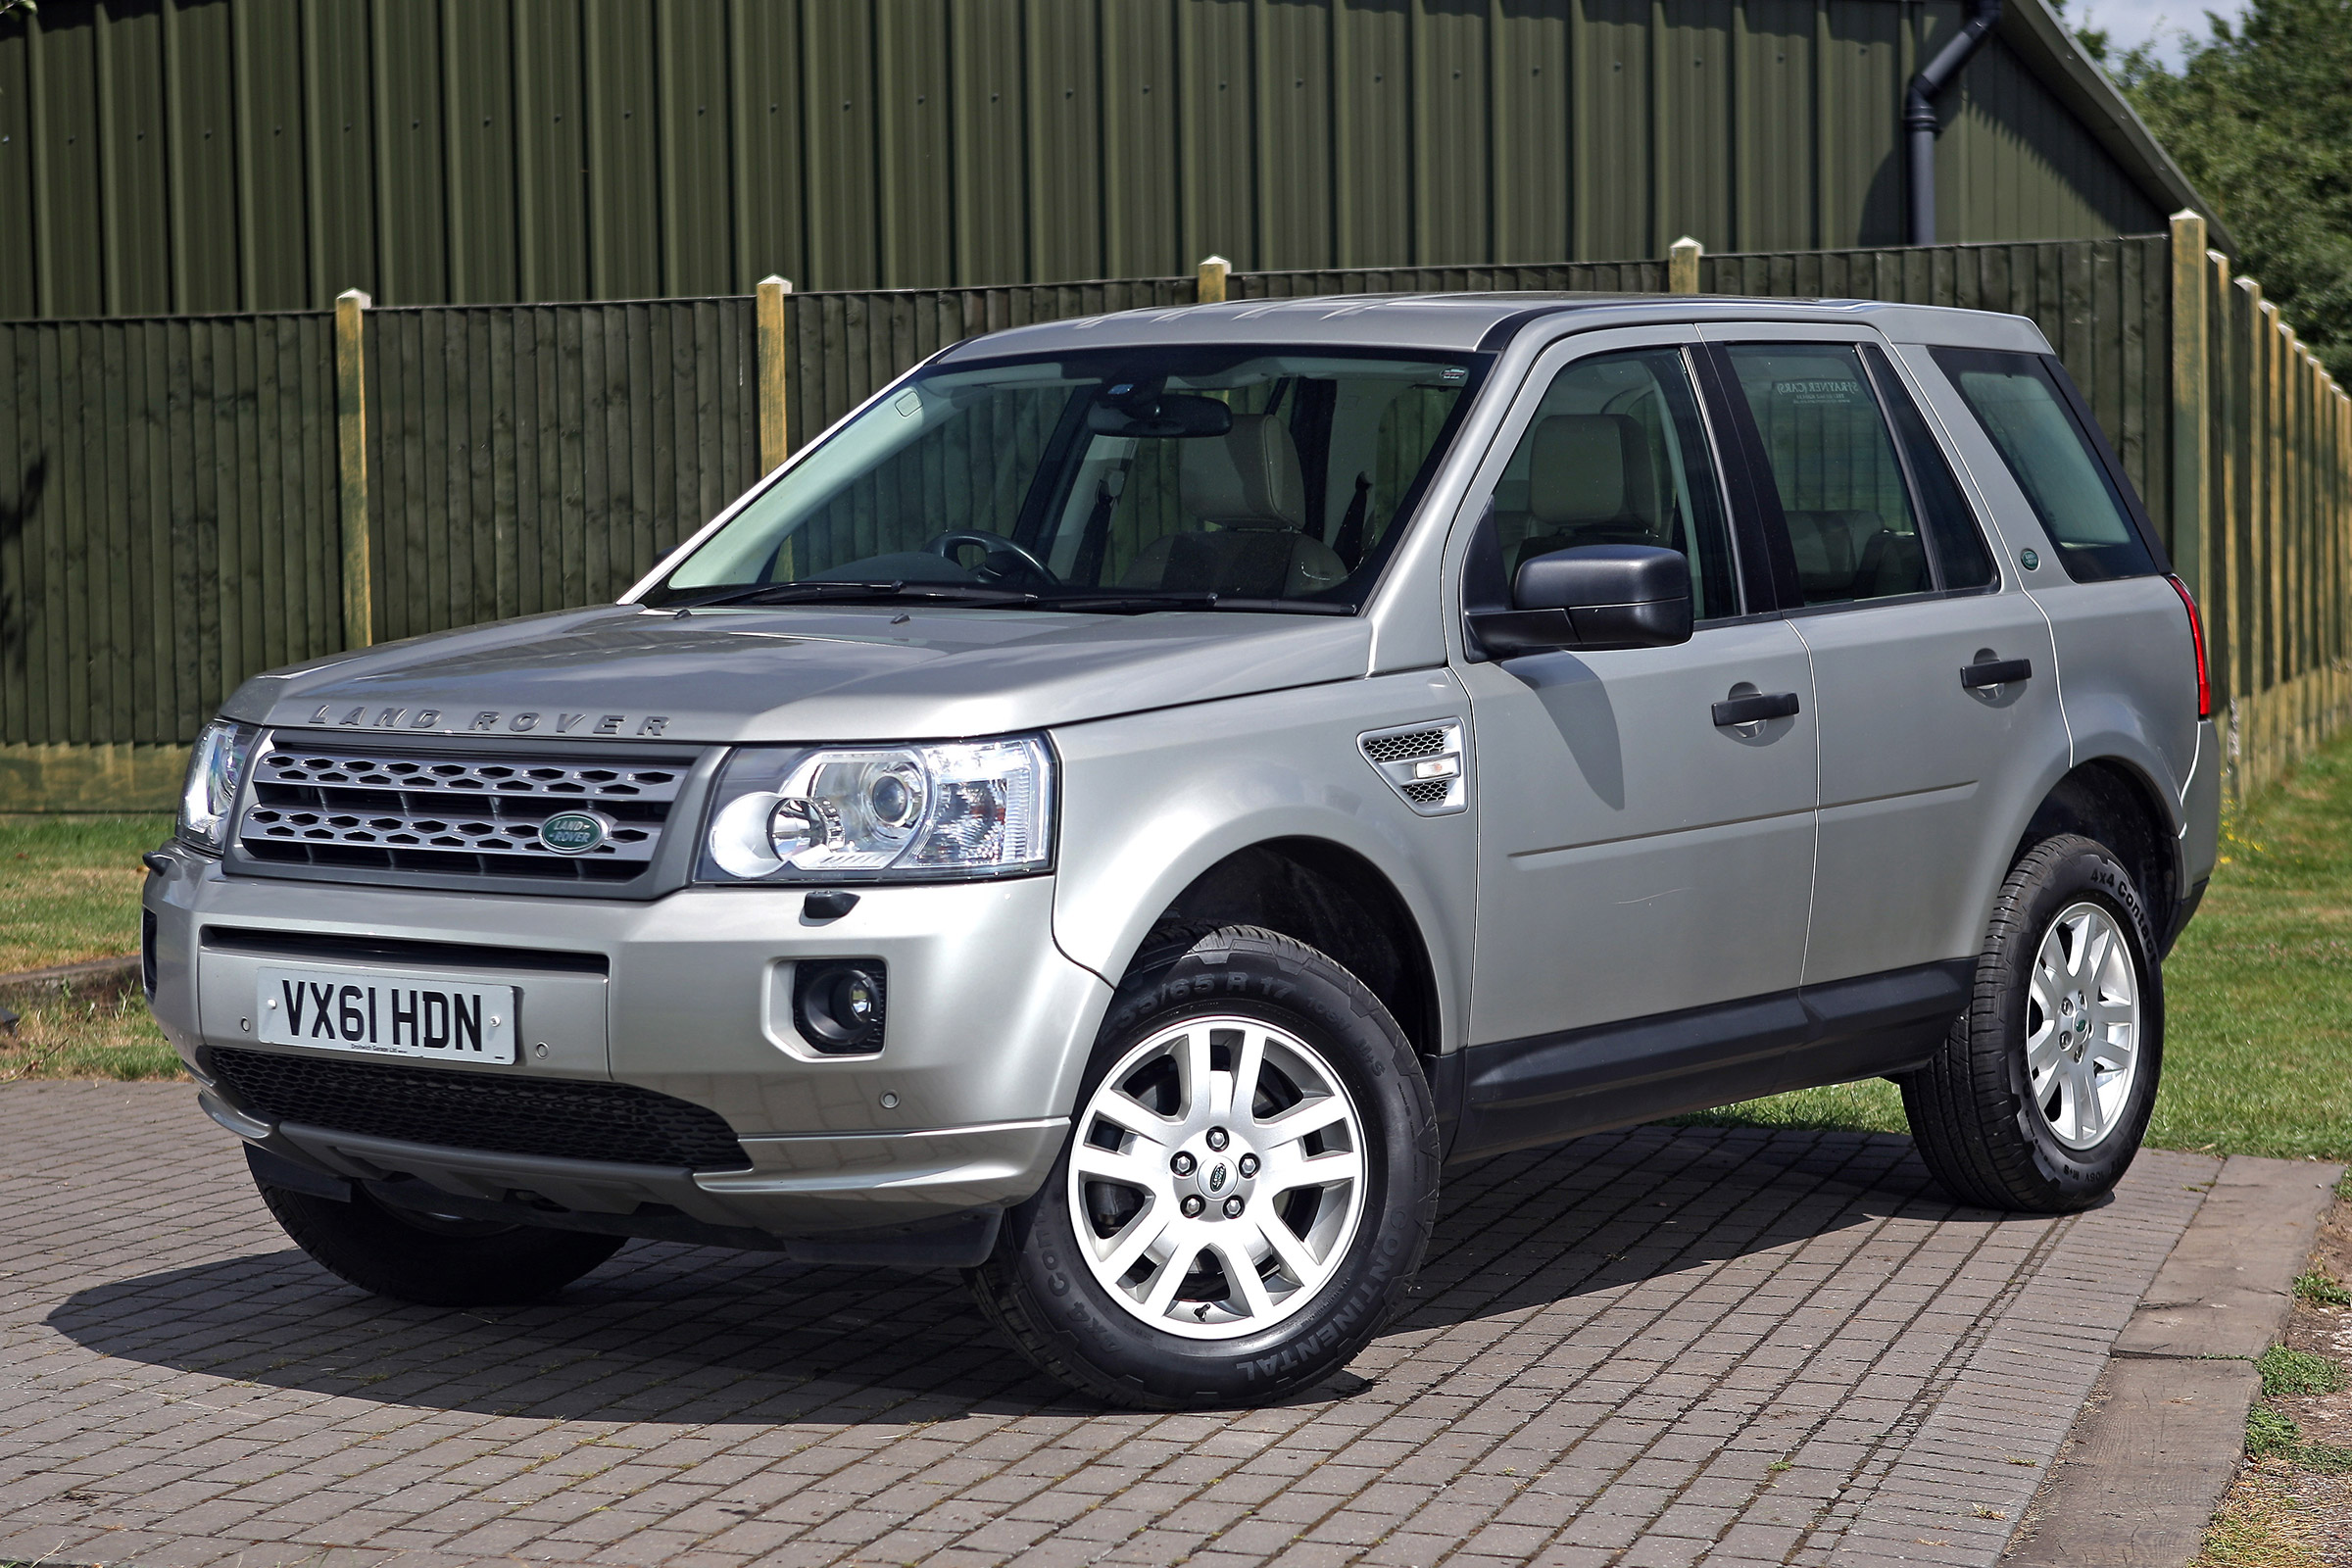 Used Land Rover Freelander 2 review | Auto Express